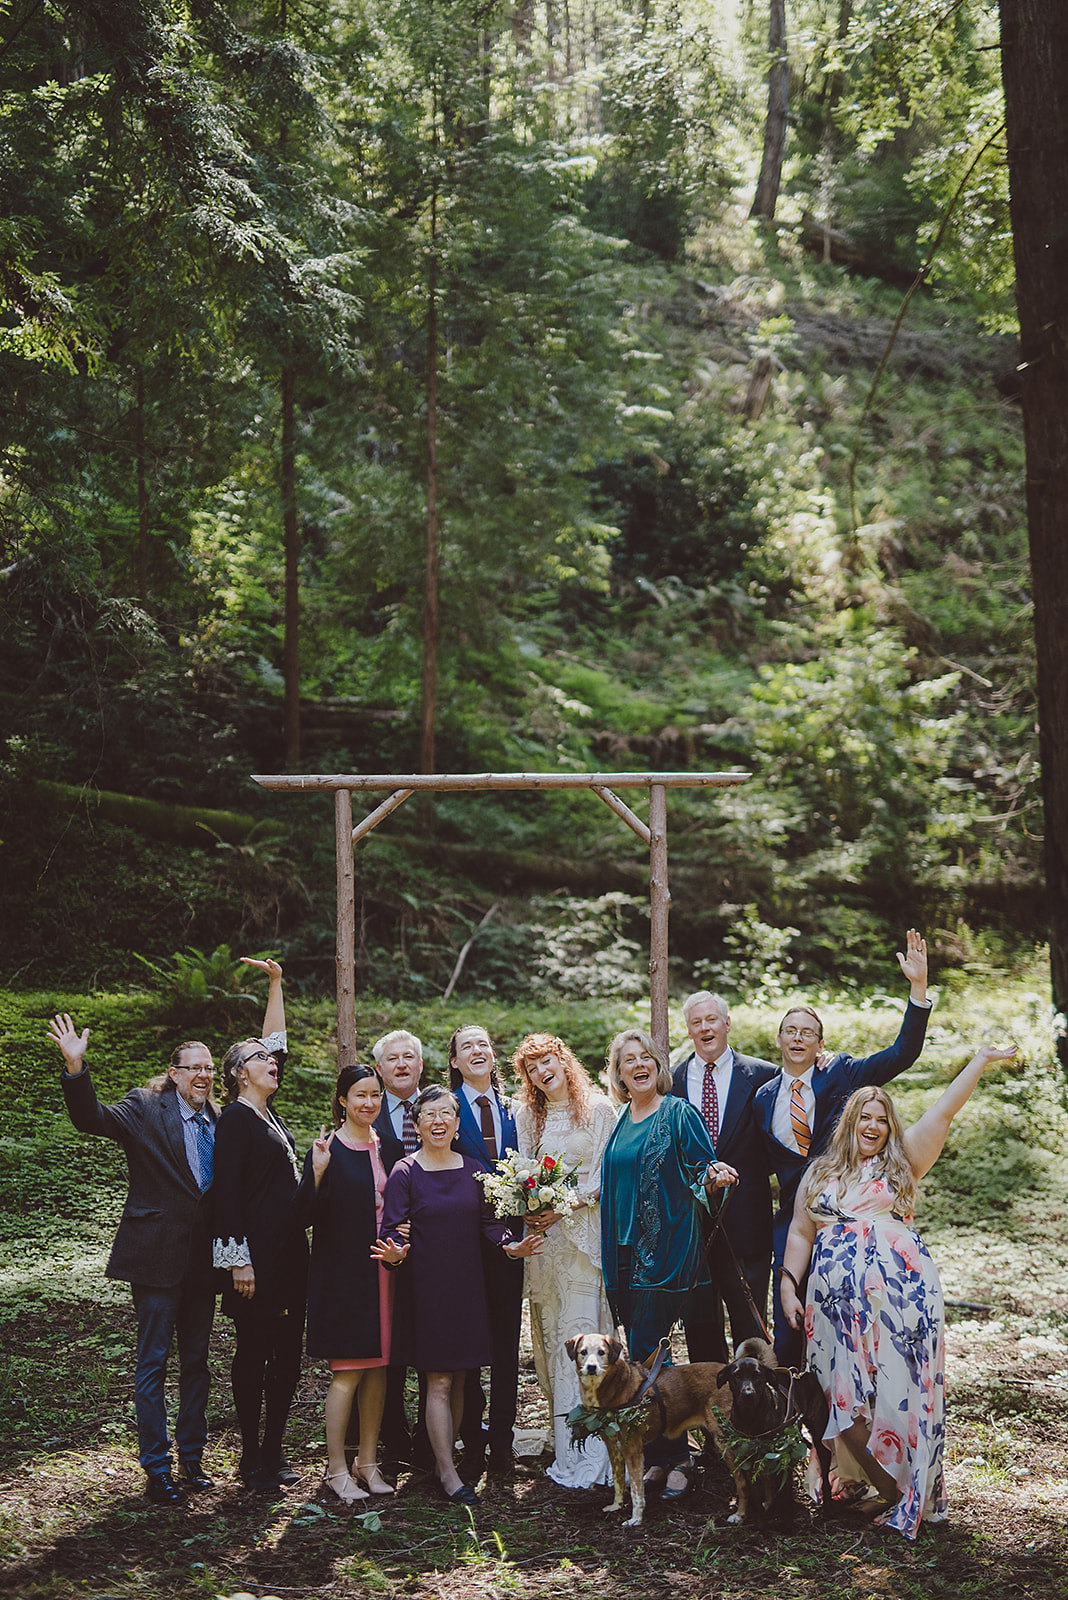 A wedding couple and their families stand for a casual photo together.